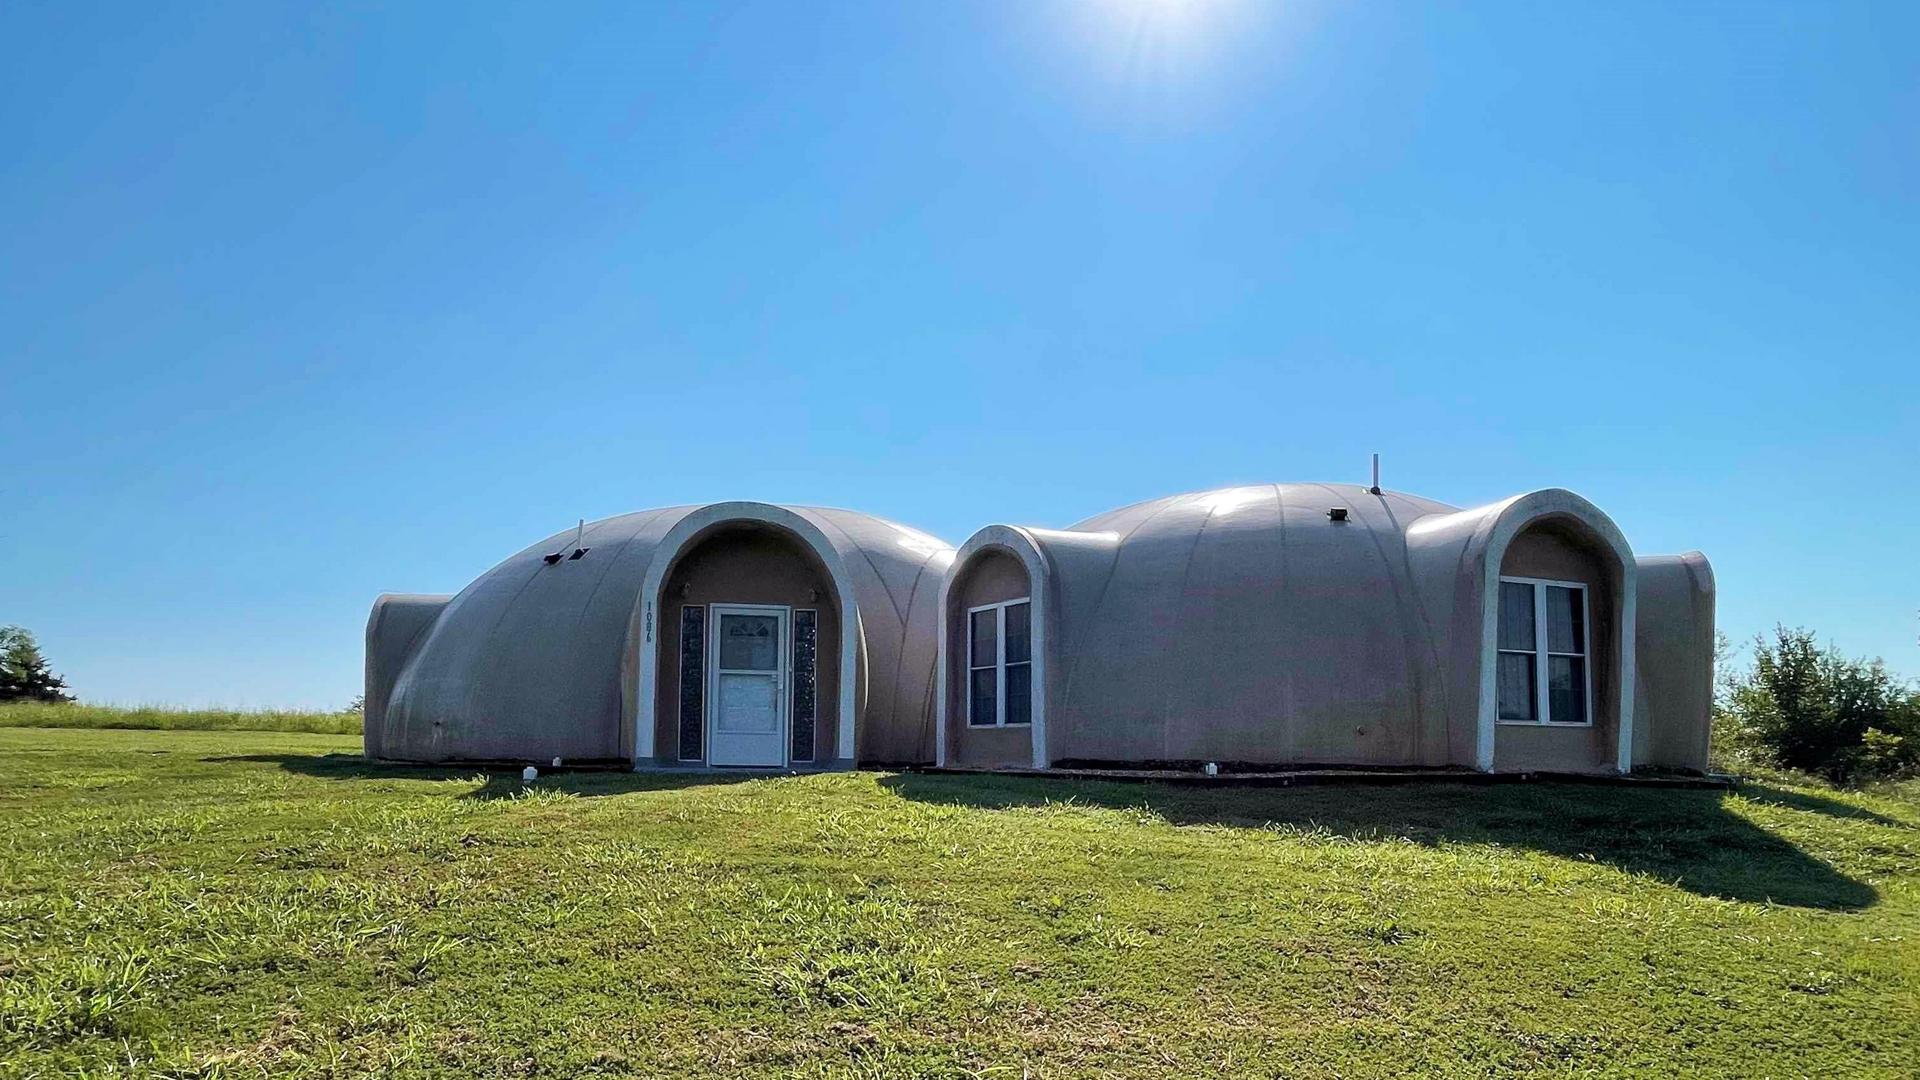 Exterior of the Monolithic Dome home.